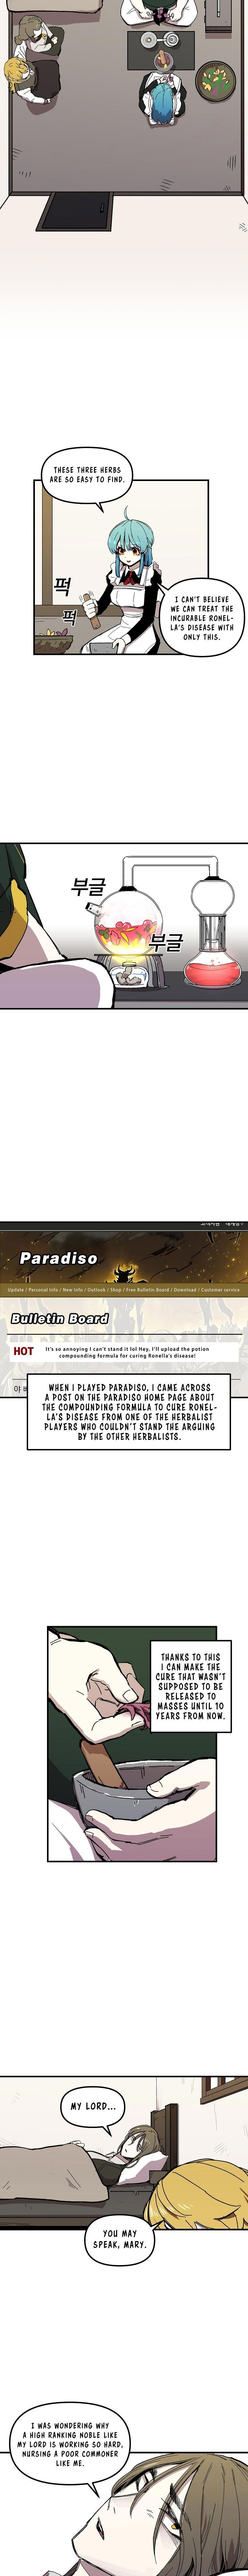 Solo Bug Player Chapter 8 page 3